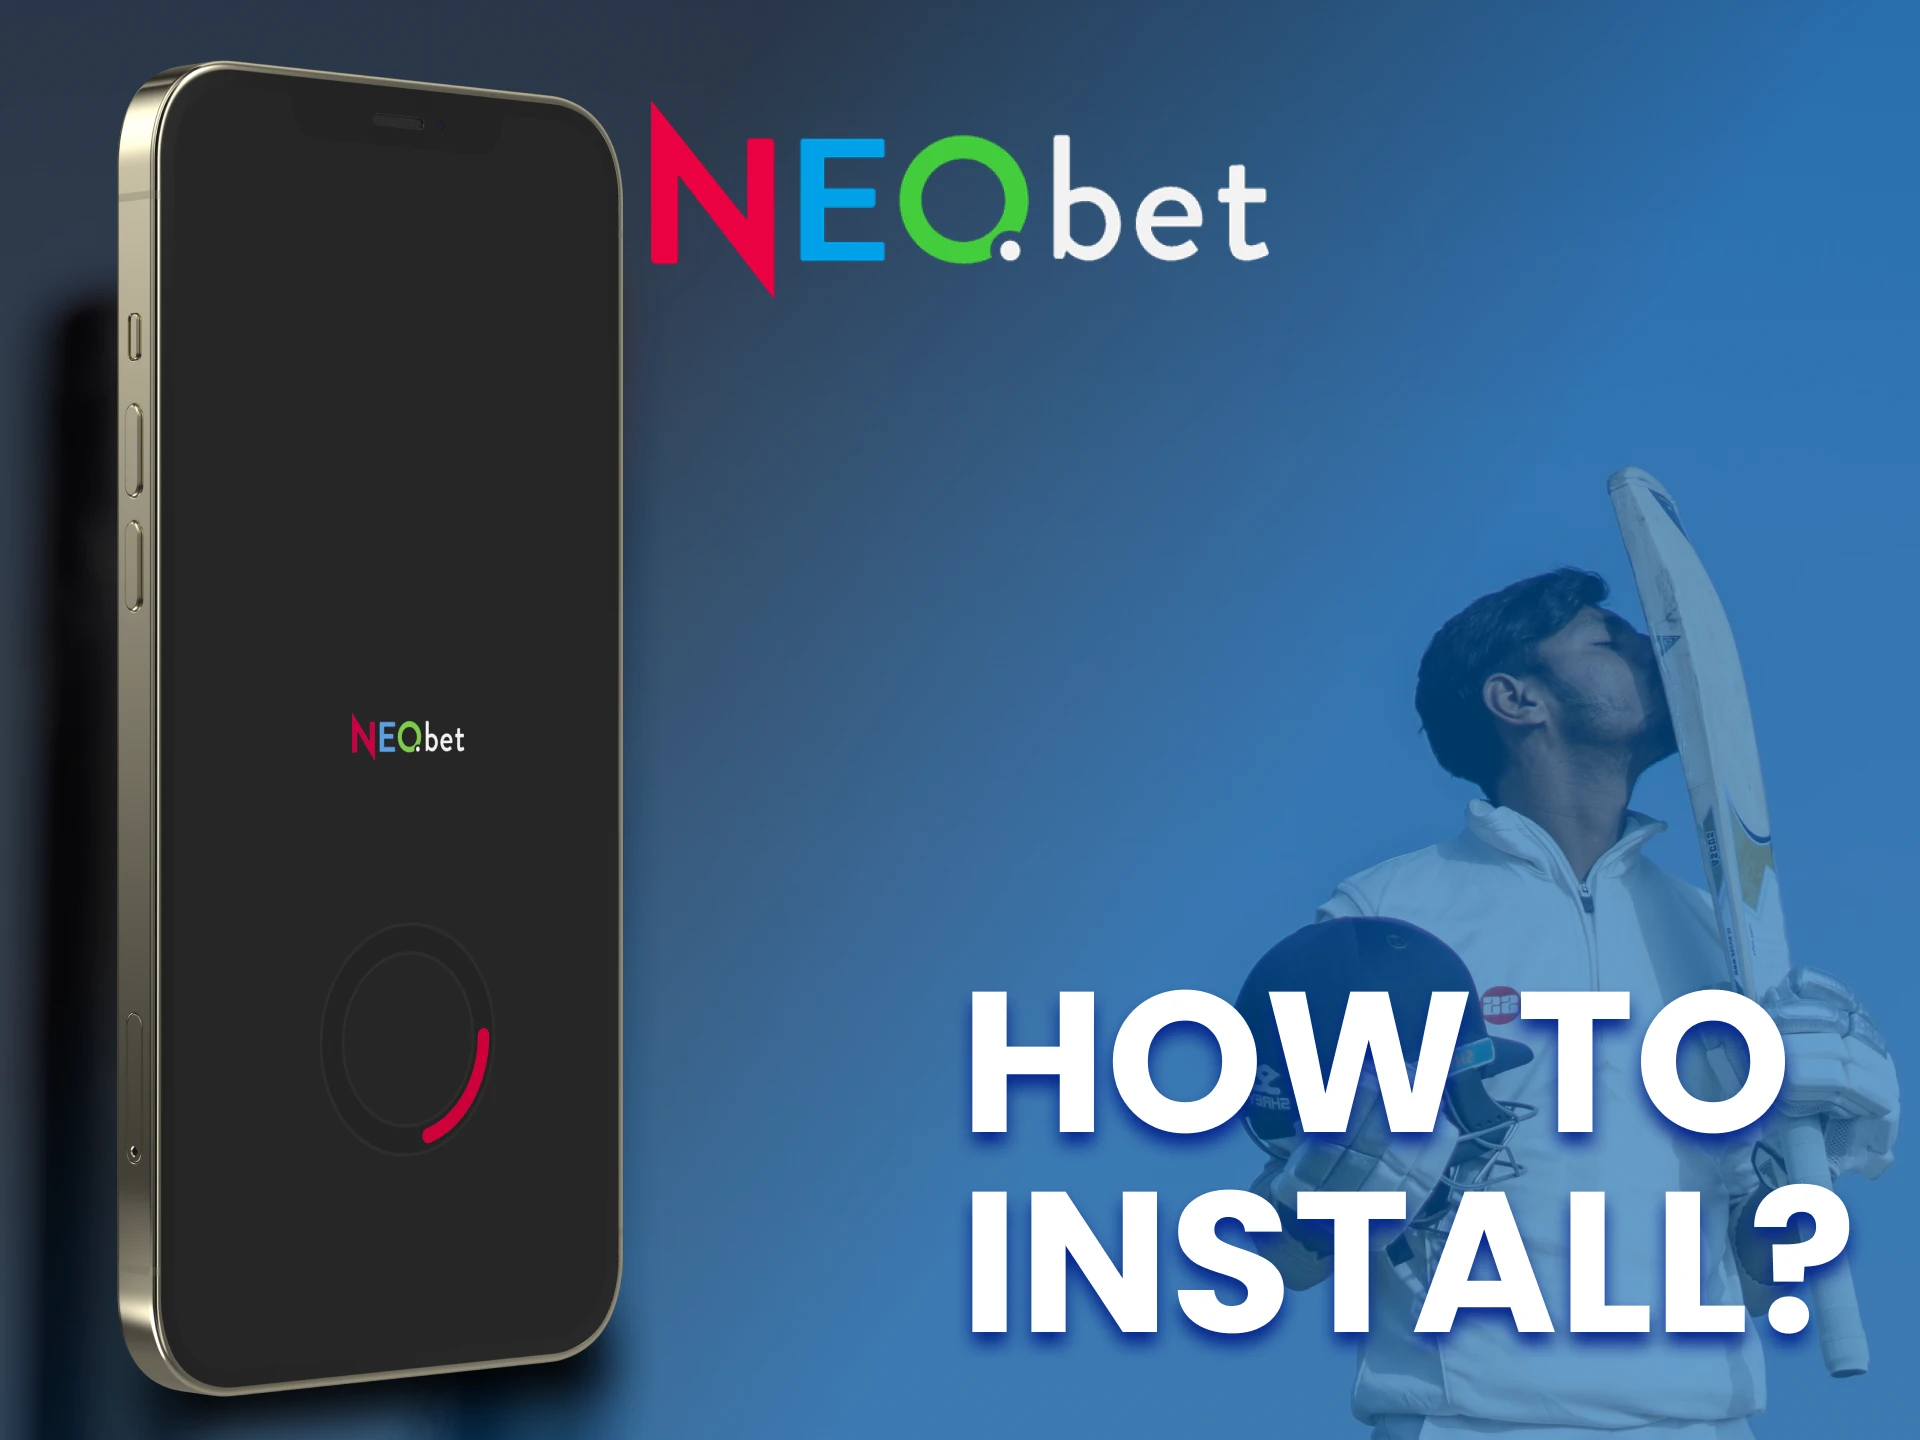 Install the NEO.bet app with these instructions.